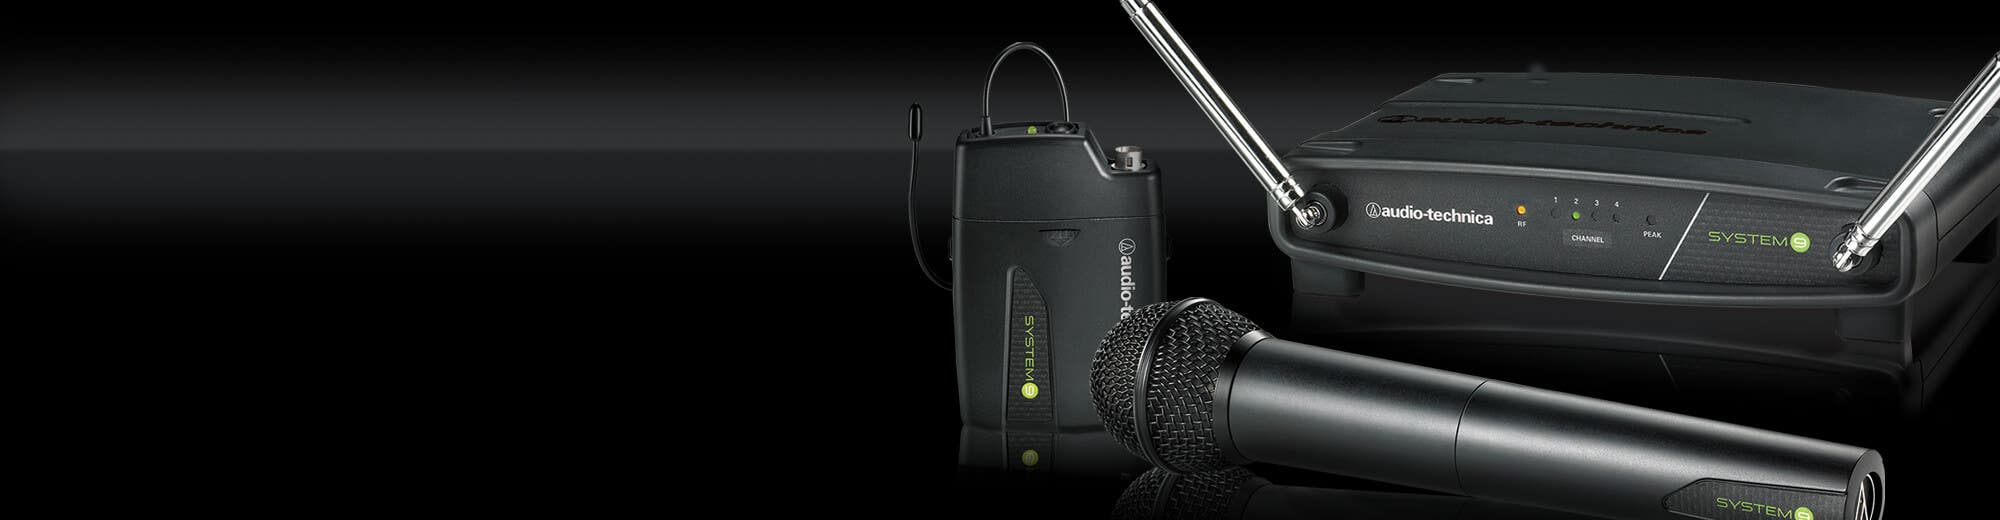 System 9 - Line Series - Wireless Systems - Microphones